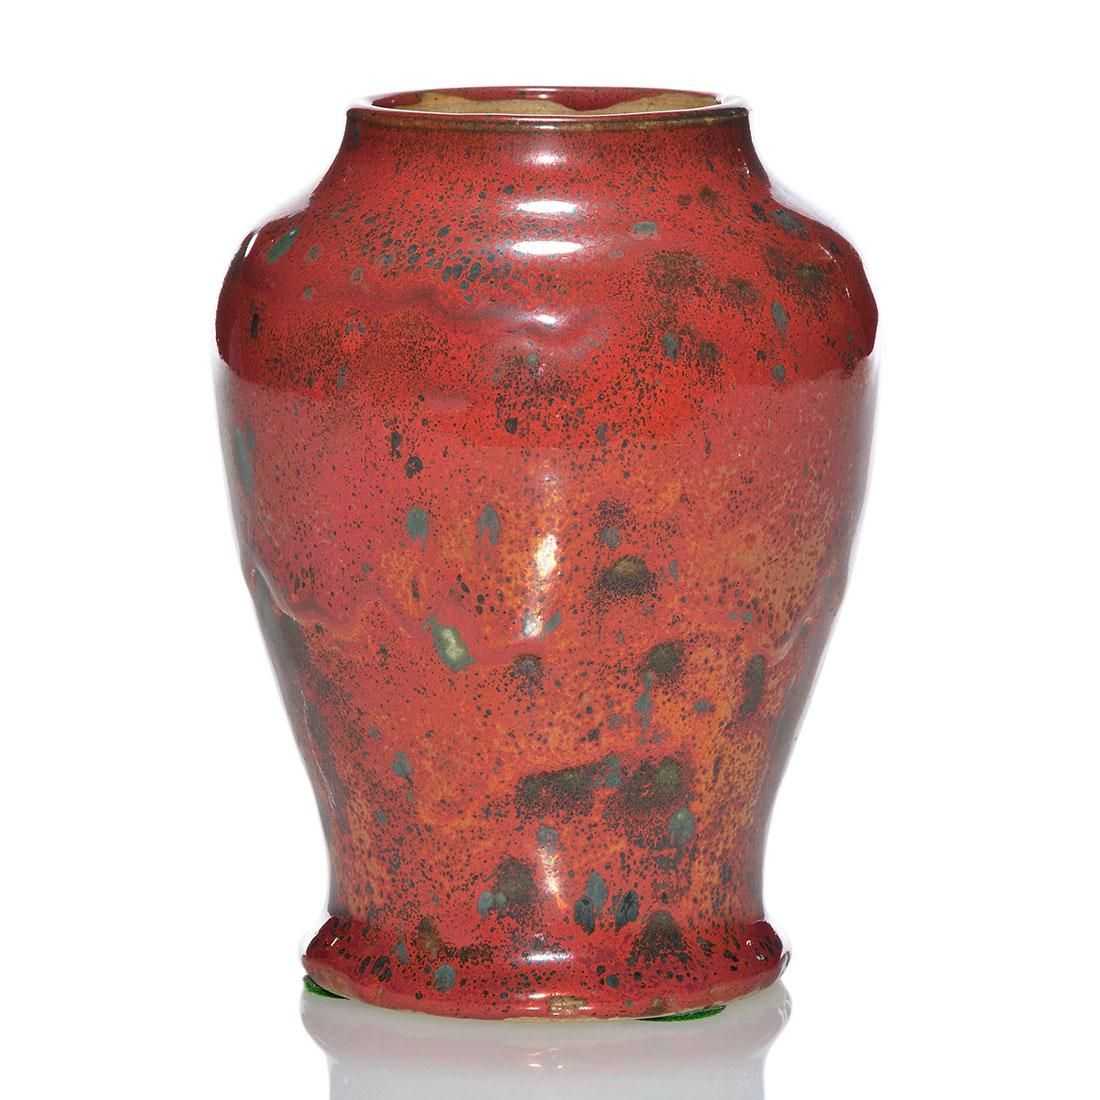 An alternative view of the Dedham Pottery oxblood vase that earned $2,400 plus the buyer’s premium in June 2018. Image courtesy of Humler & Nolan and LiveAuctioneers.